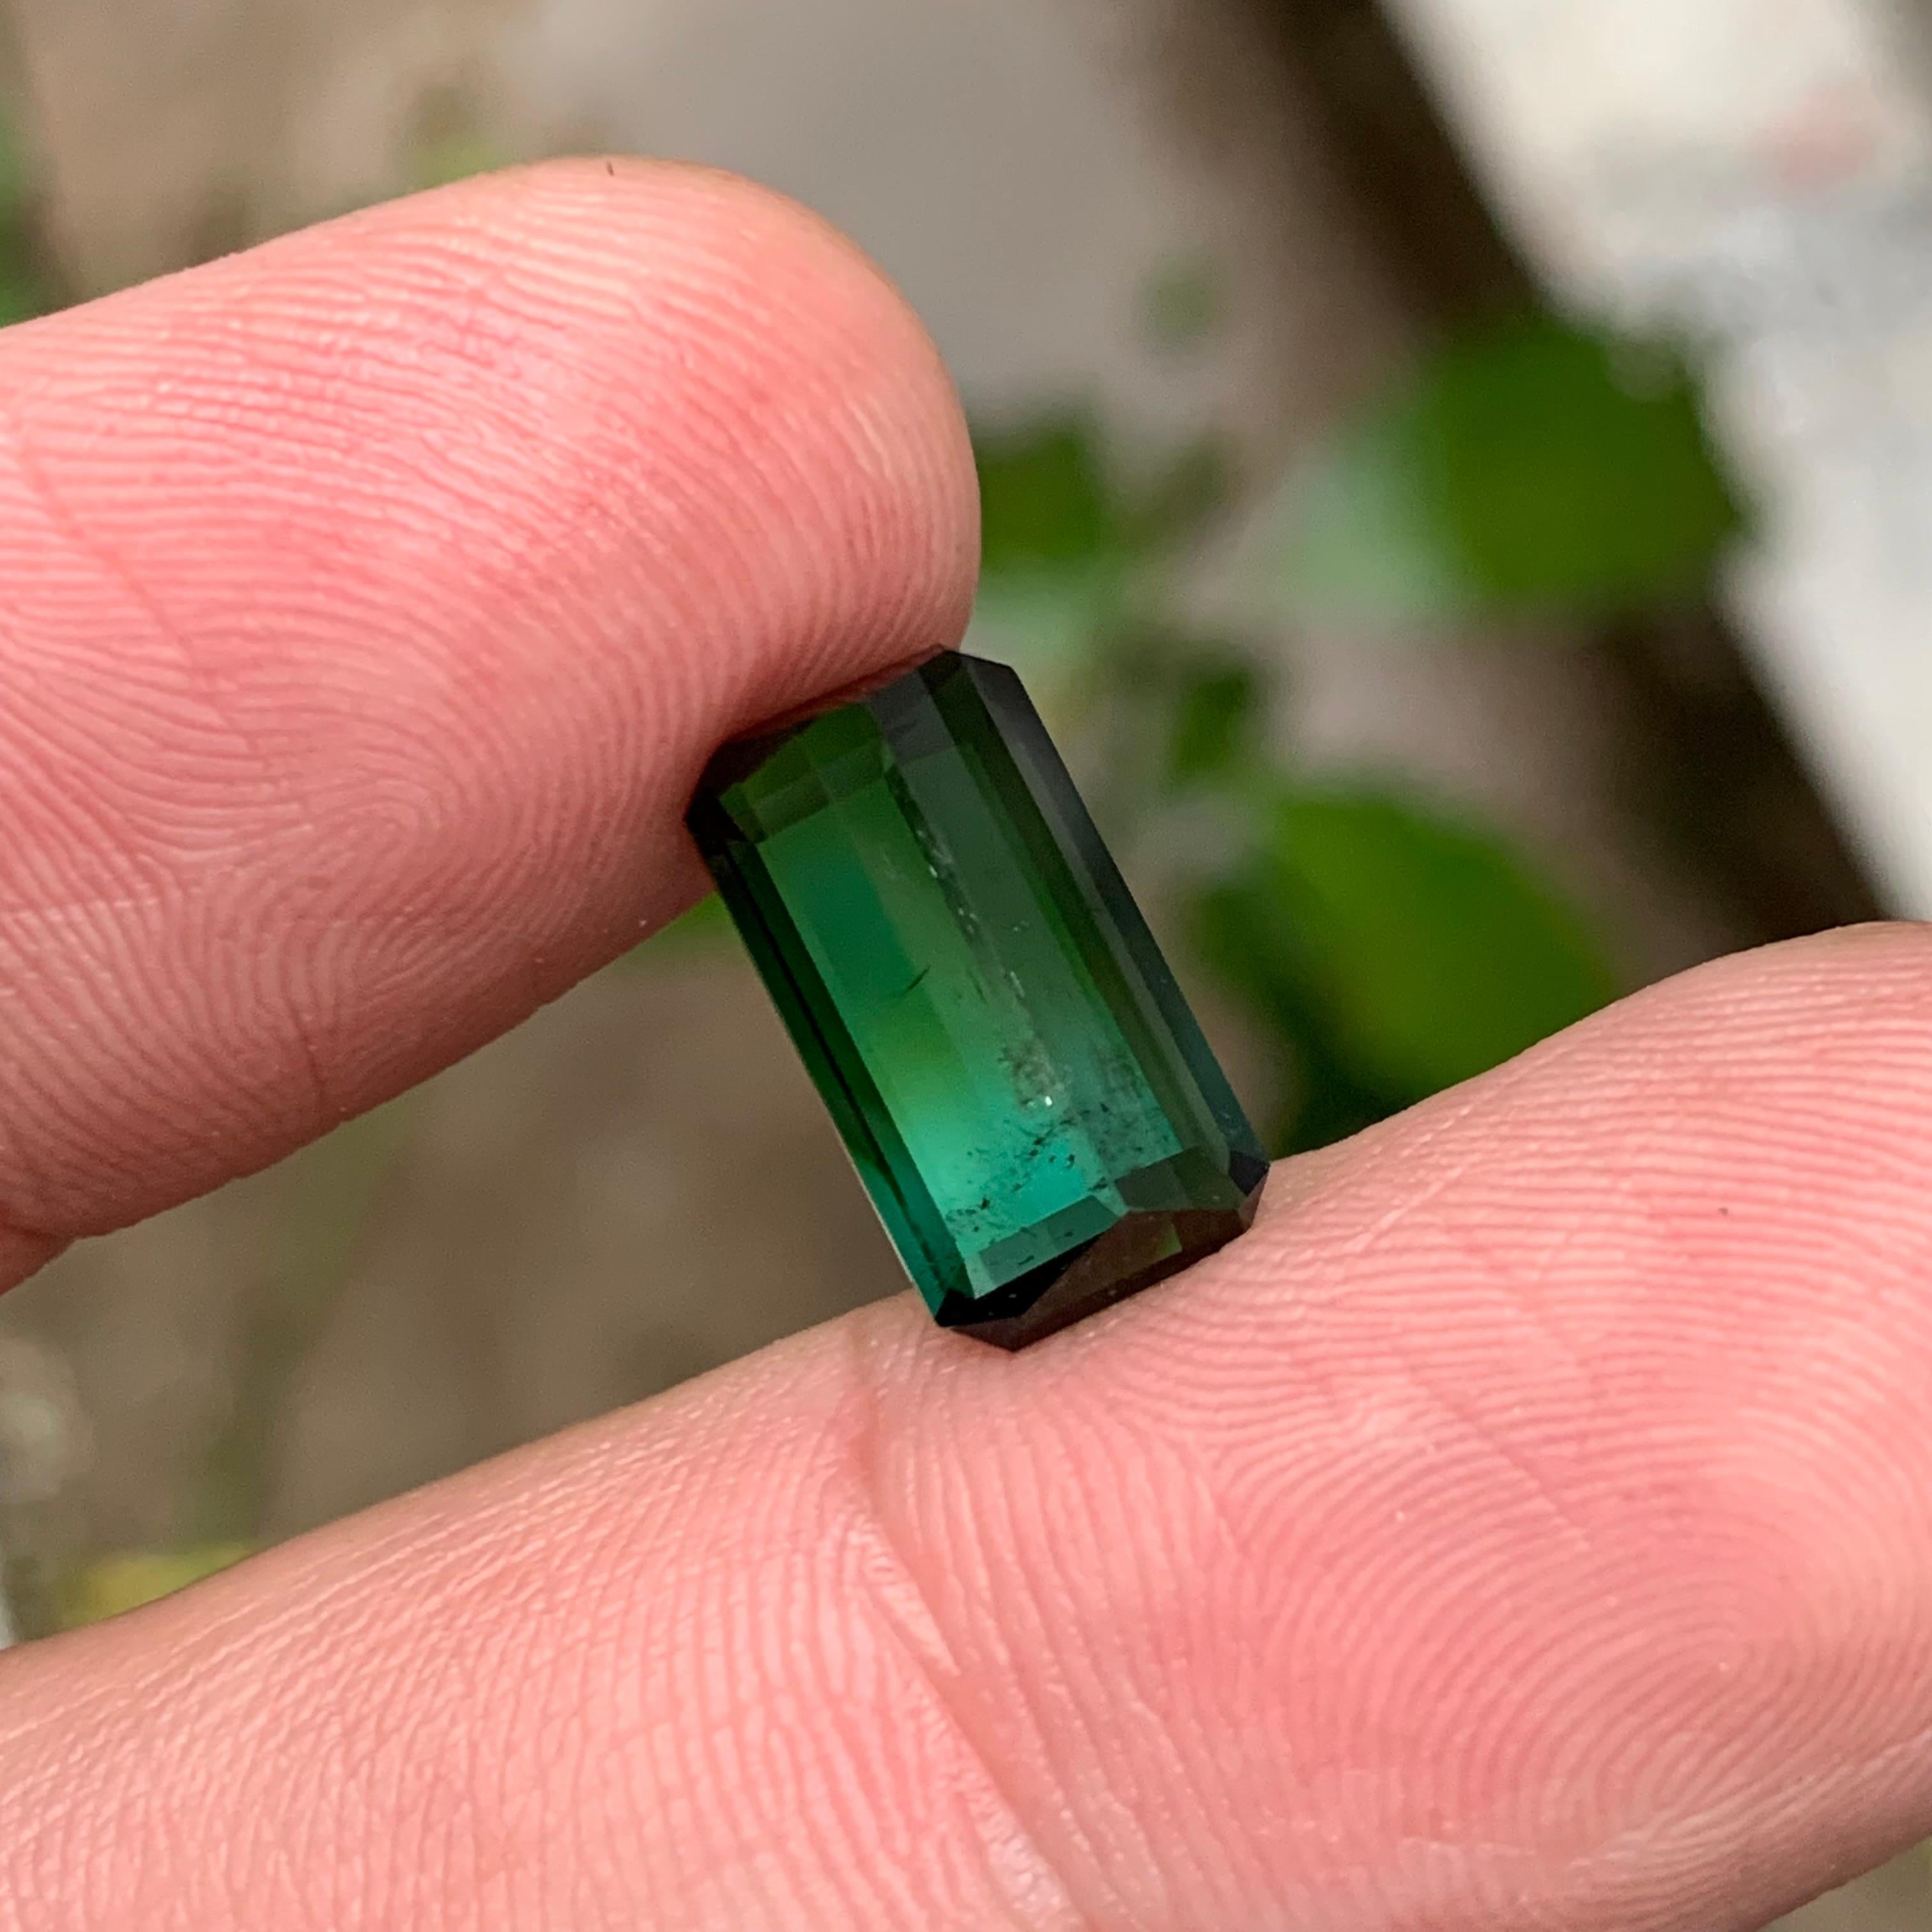 Rare Green & Neon Blue Bicolor Tourmaline Gemstone, 5.05 Ct Emerald Cut for Ring For Sale 1